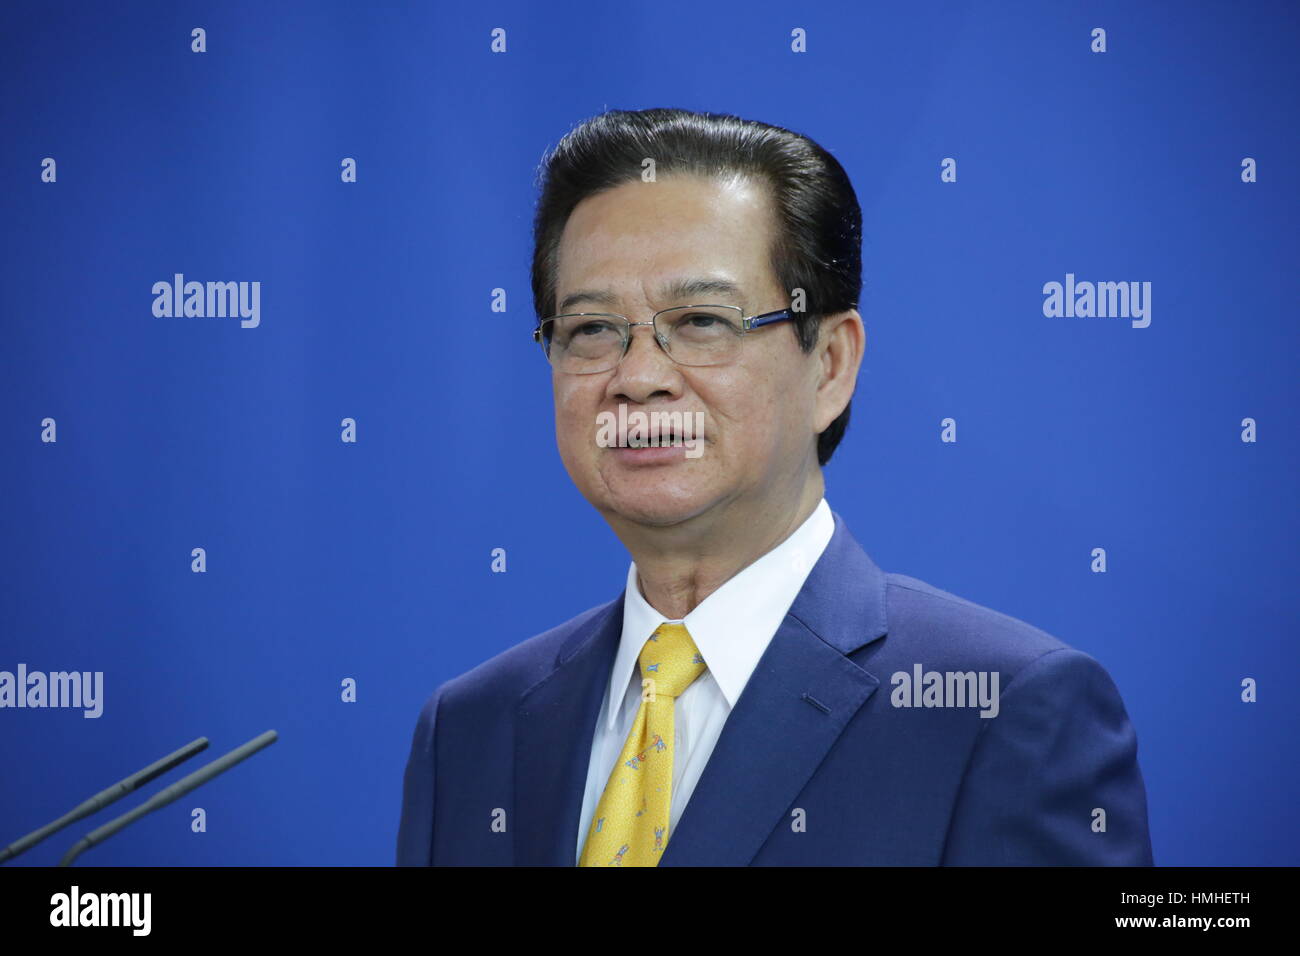 Berlin, Germany, October 15th, 2014: Vietnamese Prime Minister Nguyen Tan Dung for official visit to German Chancellor Angela Merkel. Stock Photo